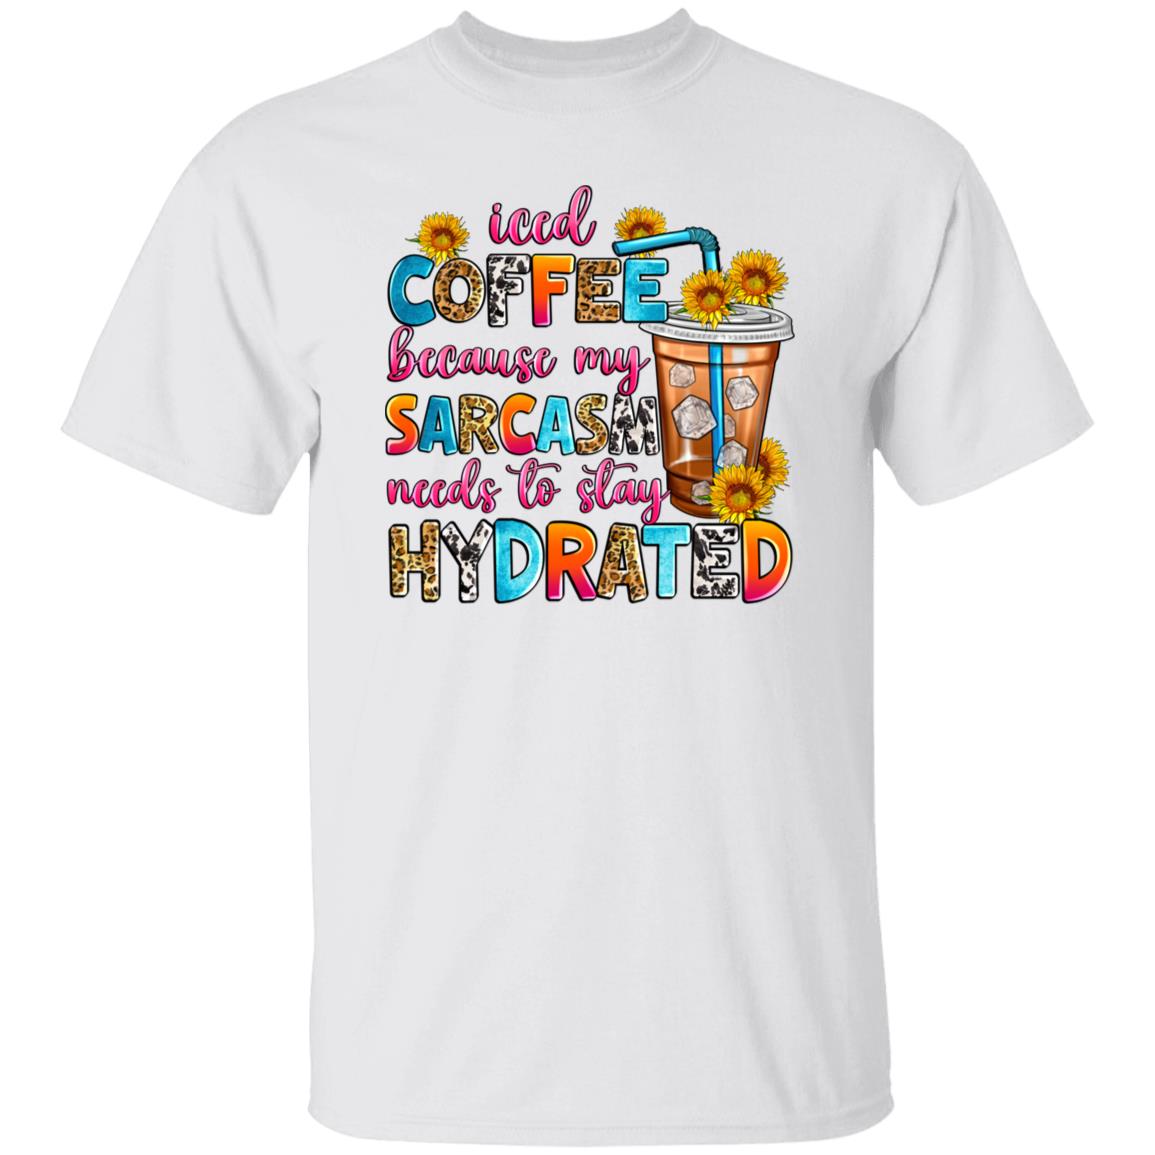 Iced coffee because my sarcasm needs to stay hydrated T-Shirt sarcastic Unisex Tee Sand White Sport Grey-Family-Gift-Planet